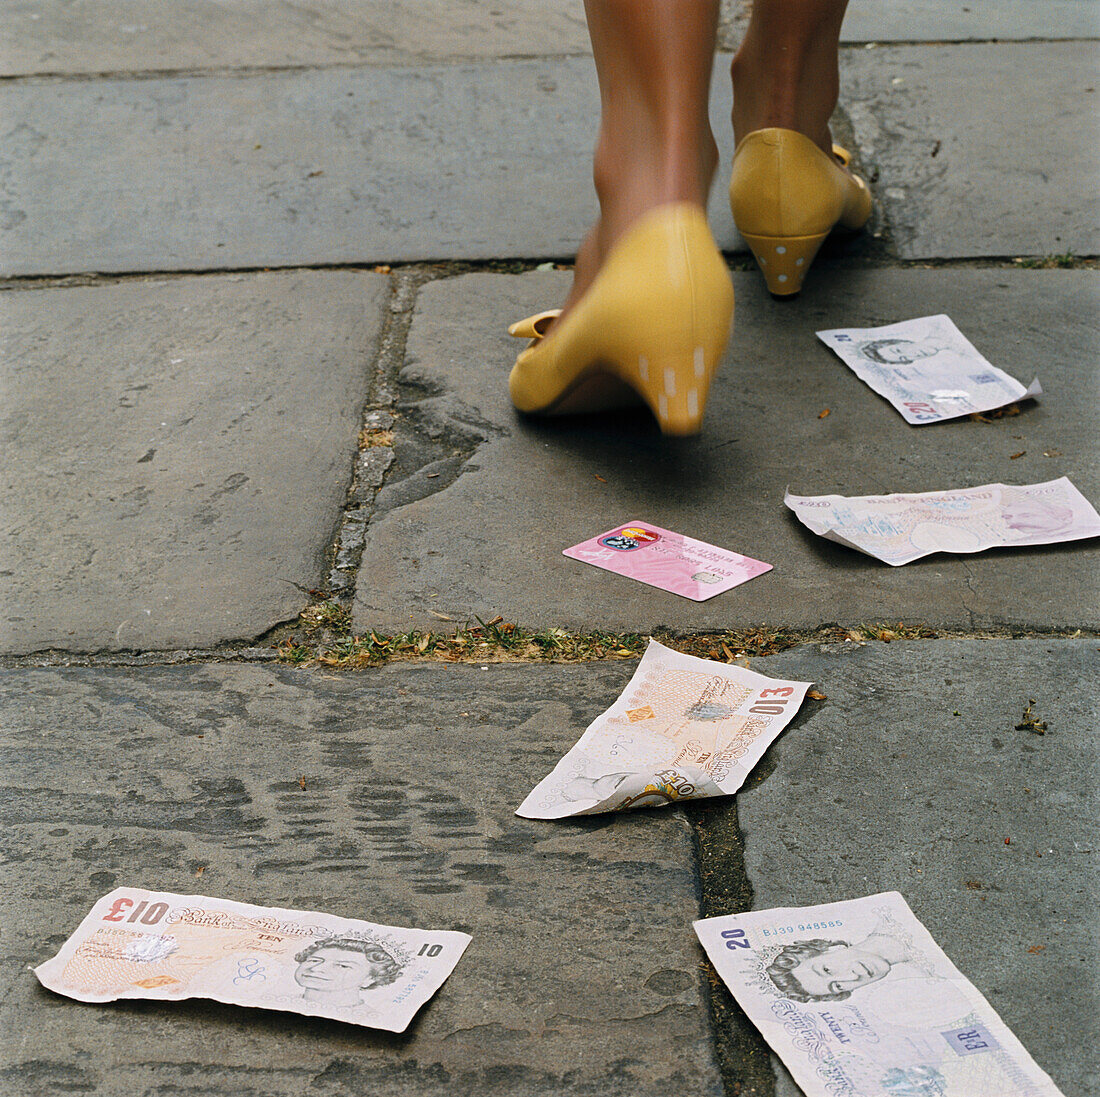 Woman walking dropping money and credit cards on the street